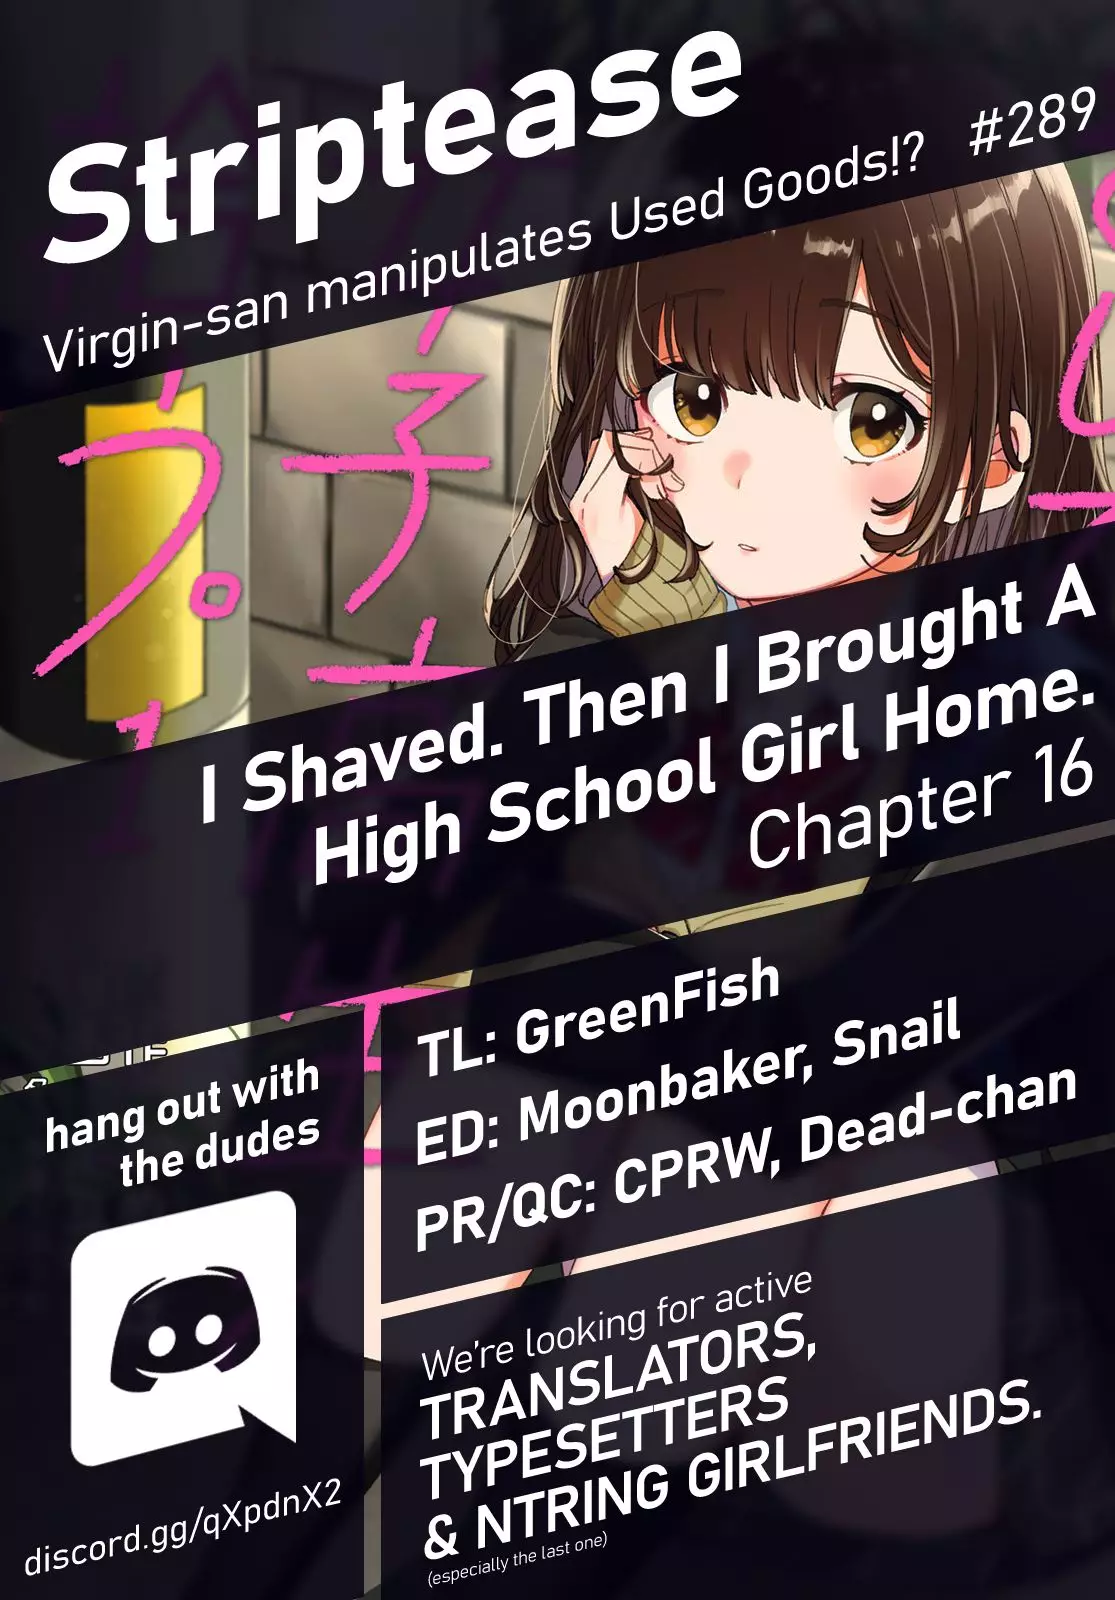 I Shaved. Then I Brought a High School Girl Home. - 16 page 1